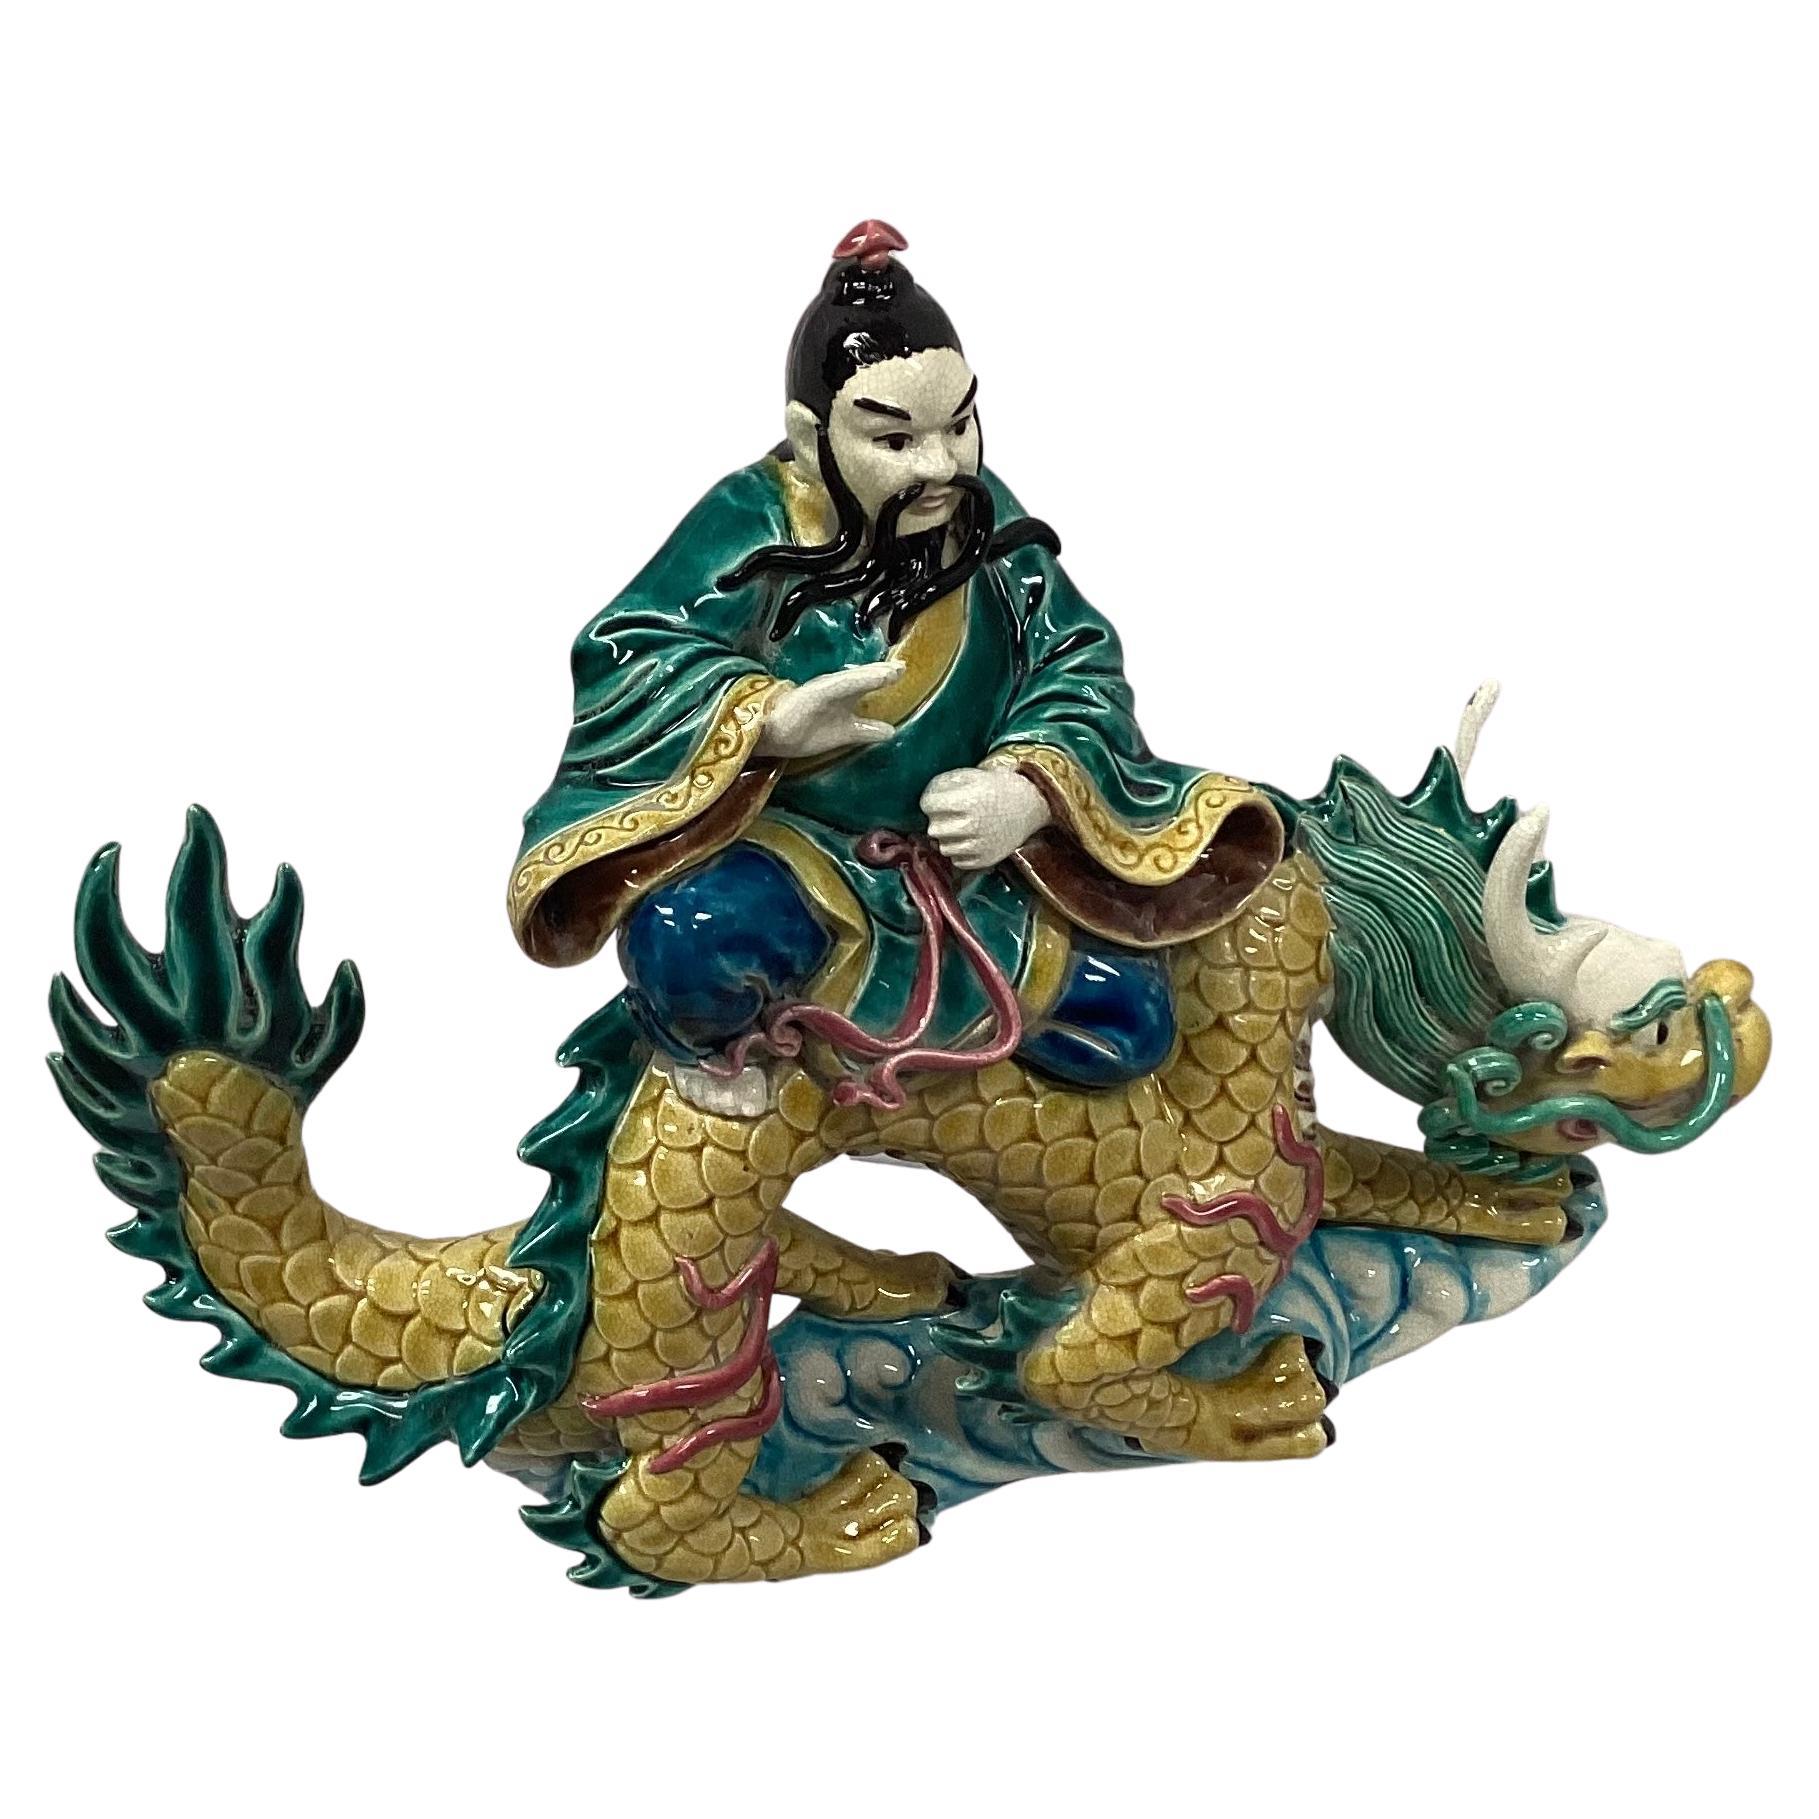 19th century Chinese Sancai roof tile. This piece is hand glazed and the painted tile is of pottery, depicting a warrior riding a large mythical dragon serpent. Beautiful colors of yellow, green, blue and pink. It is presented mounted on a Lucite